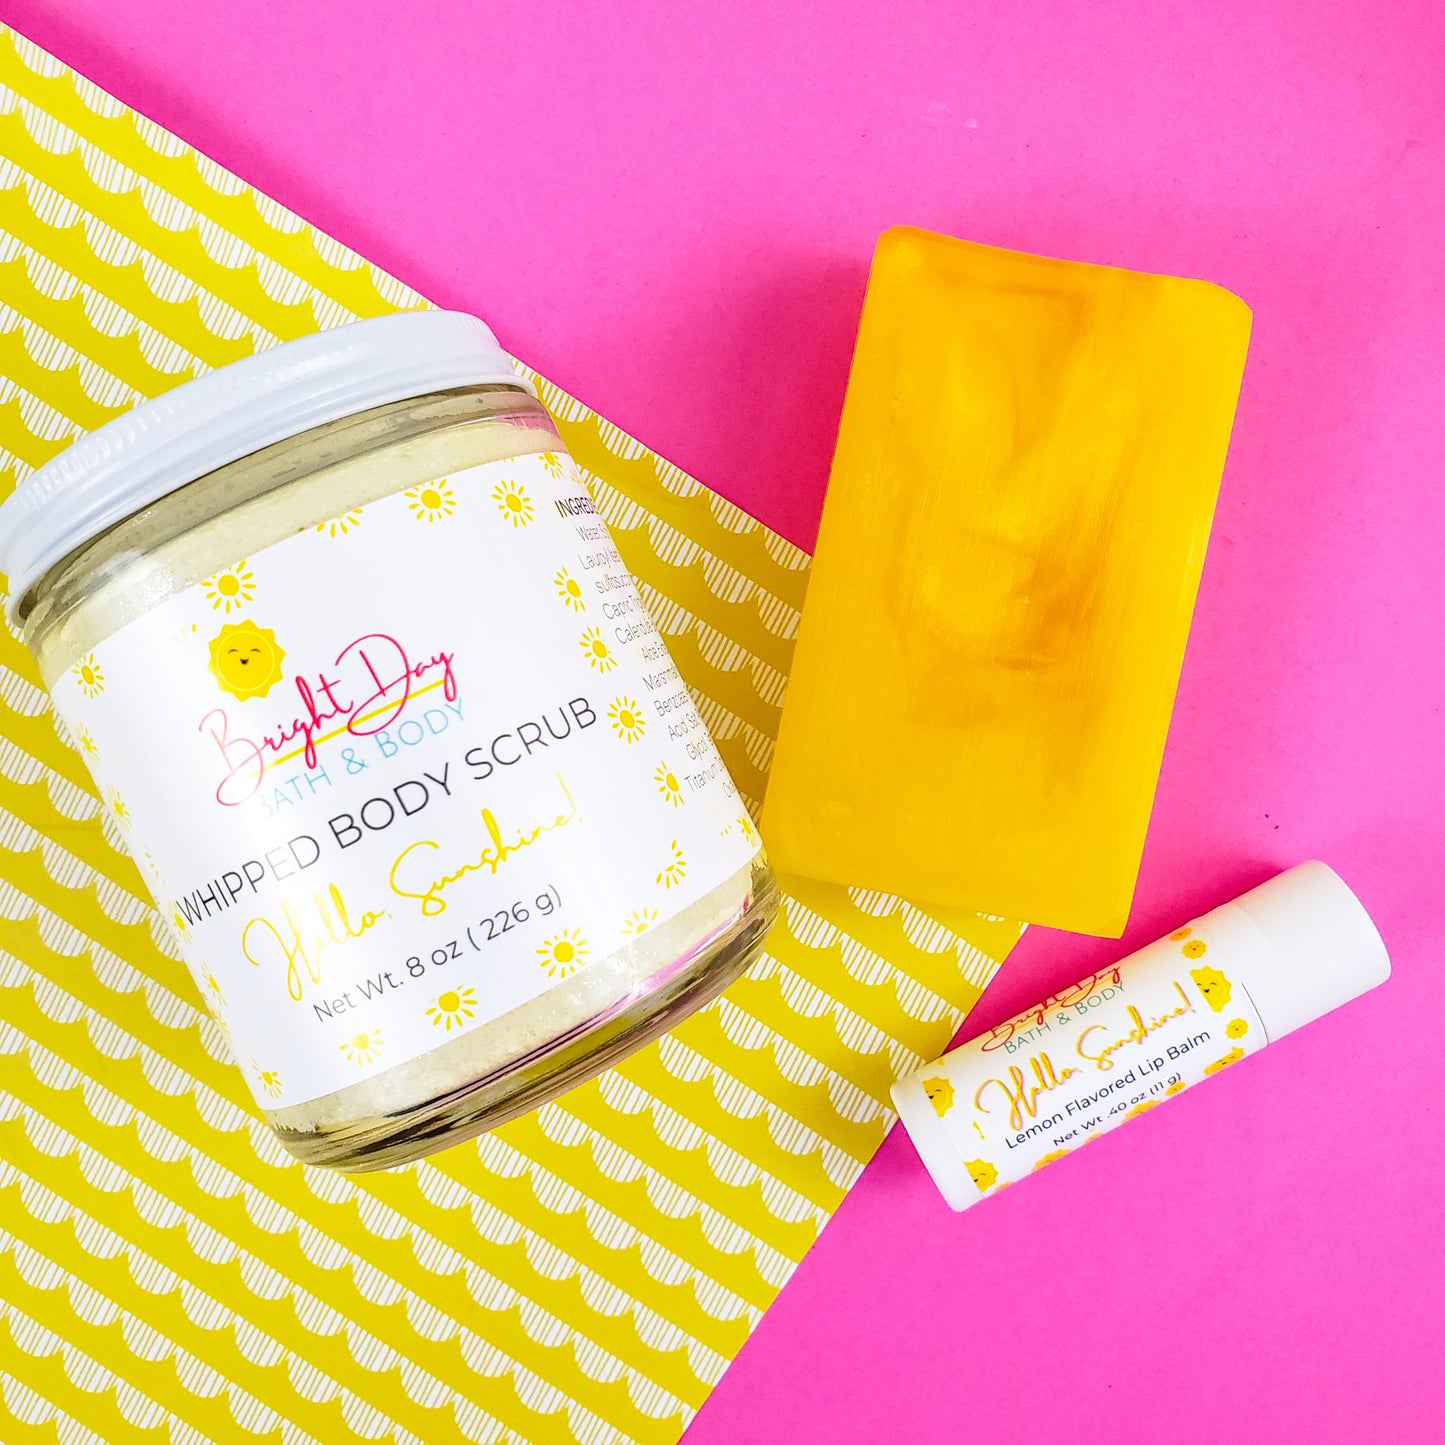 a Hello Sunshine body scrub, soap bar and lip balm on a pink and yellow background